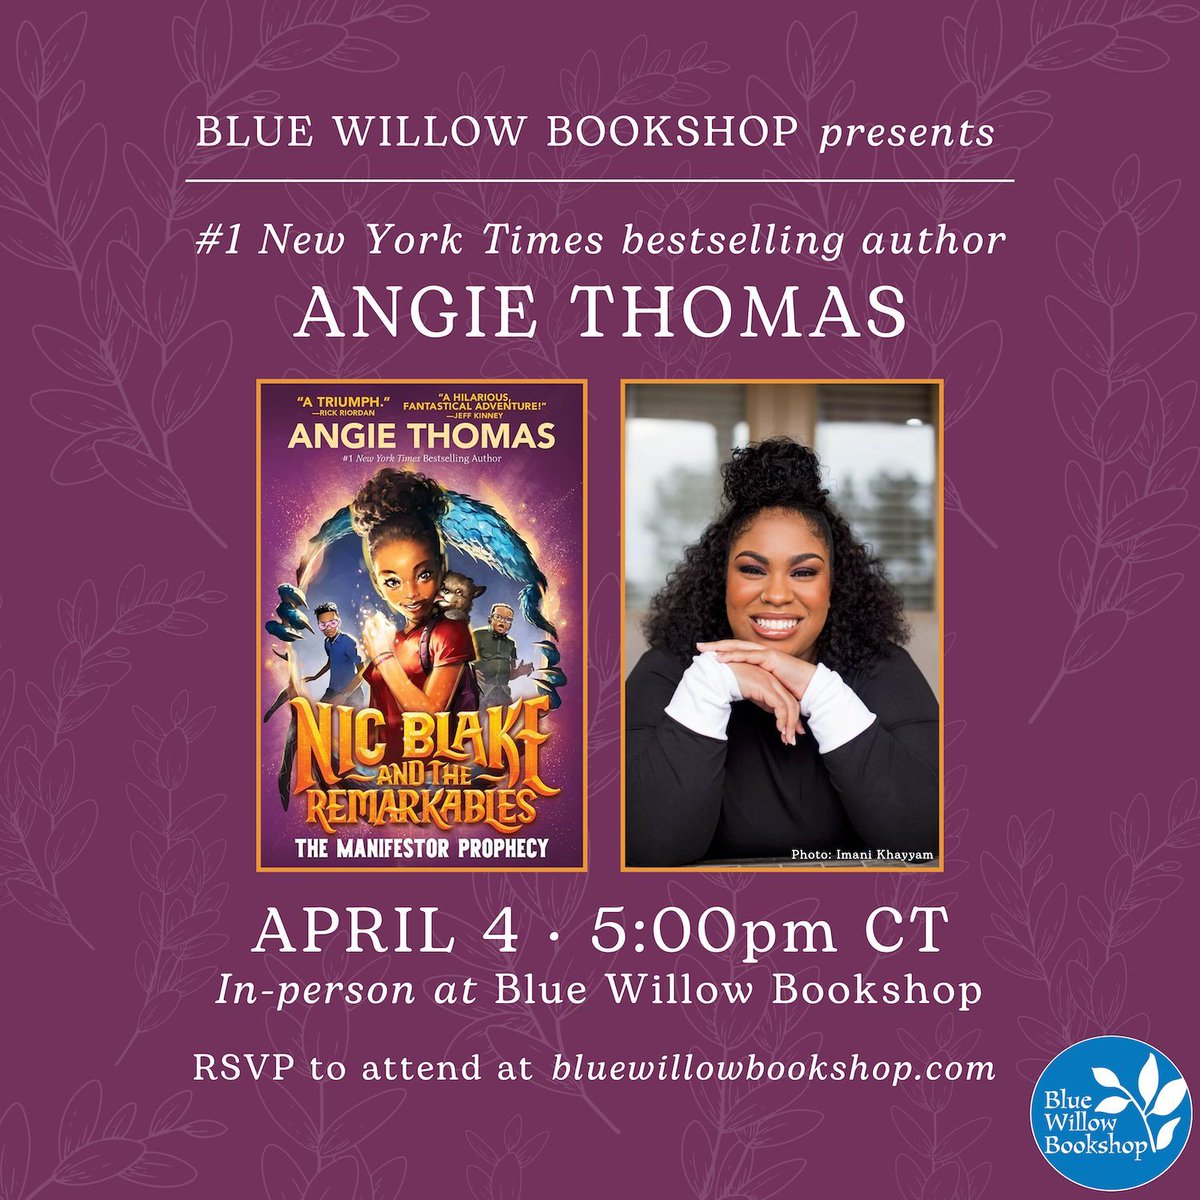 Internationally bestselling author @angiecthomas is coming to the bookshop! 😍 Join us to celebrate her magical #mglit debut, NIC BLAKE AND THE REMARKABLES. 💫 RSVP and reserve your book here; we can't wait for this event! bluewillowbookshop.com/event/thomas-2… #Houston @HarperChildrens